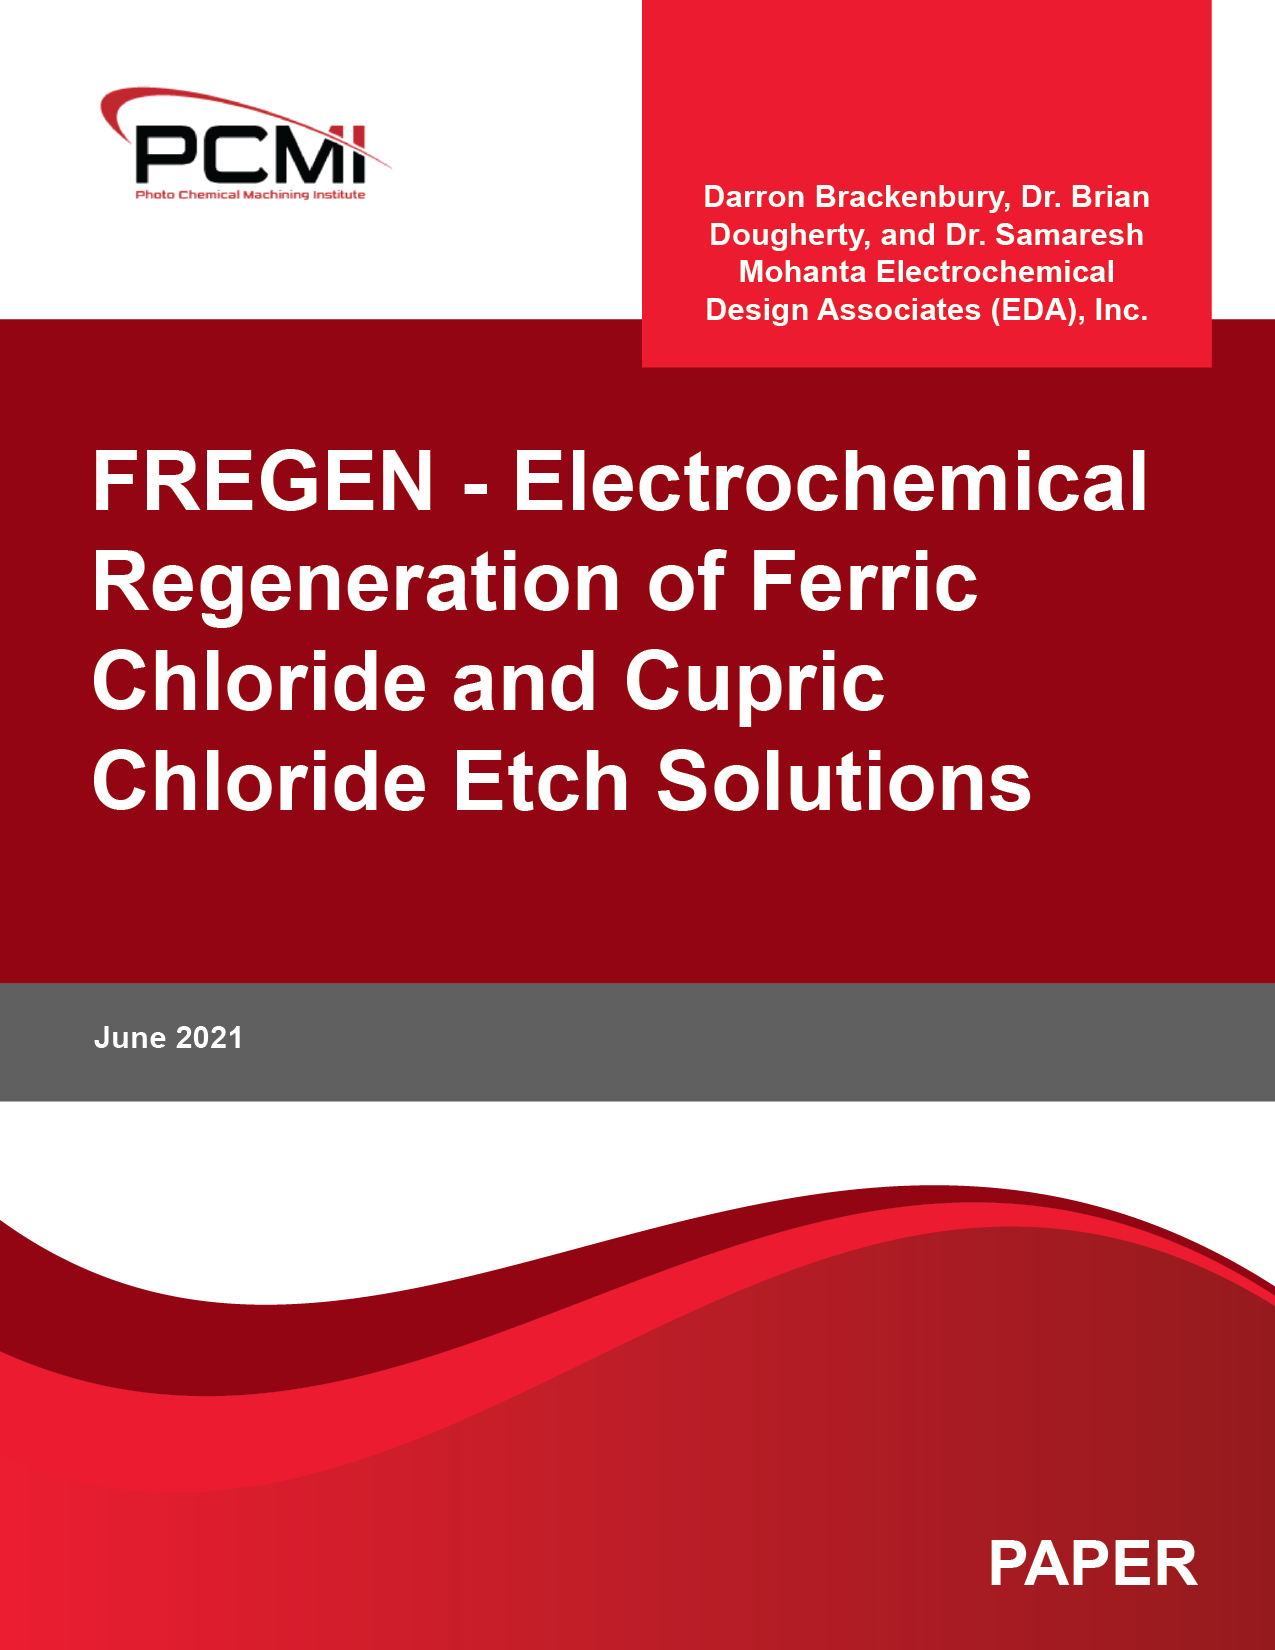 FREGEN – Electrochemical Regeneration of Ferric Chloride and Cupric Chloride Etch Solutions